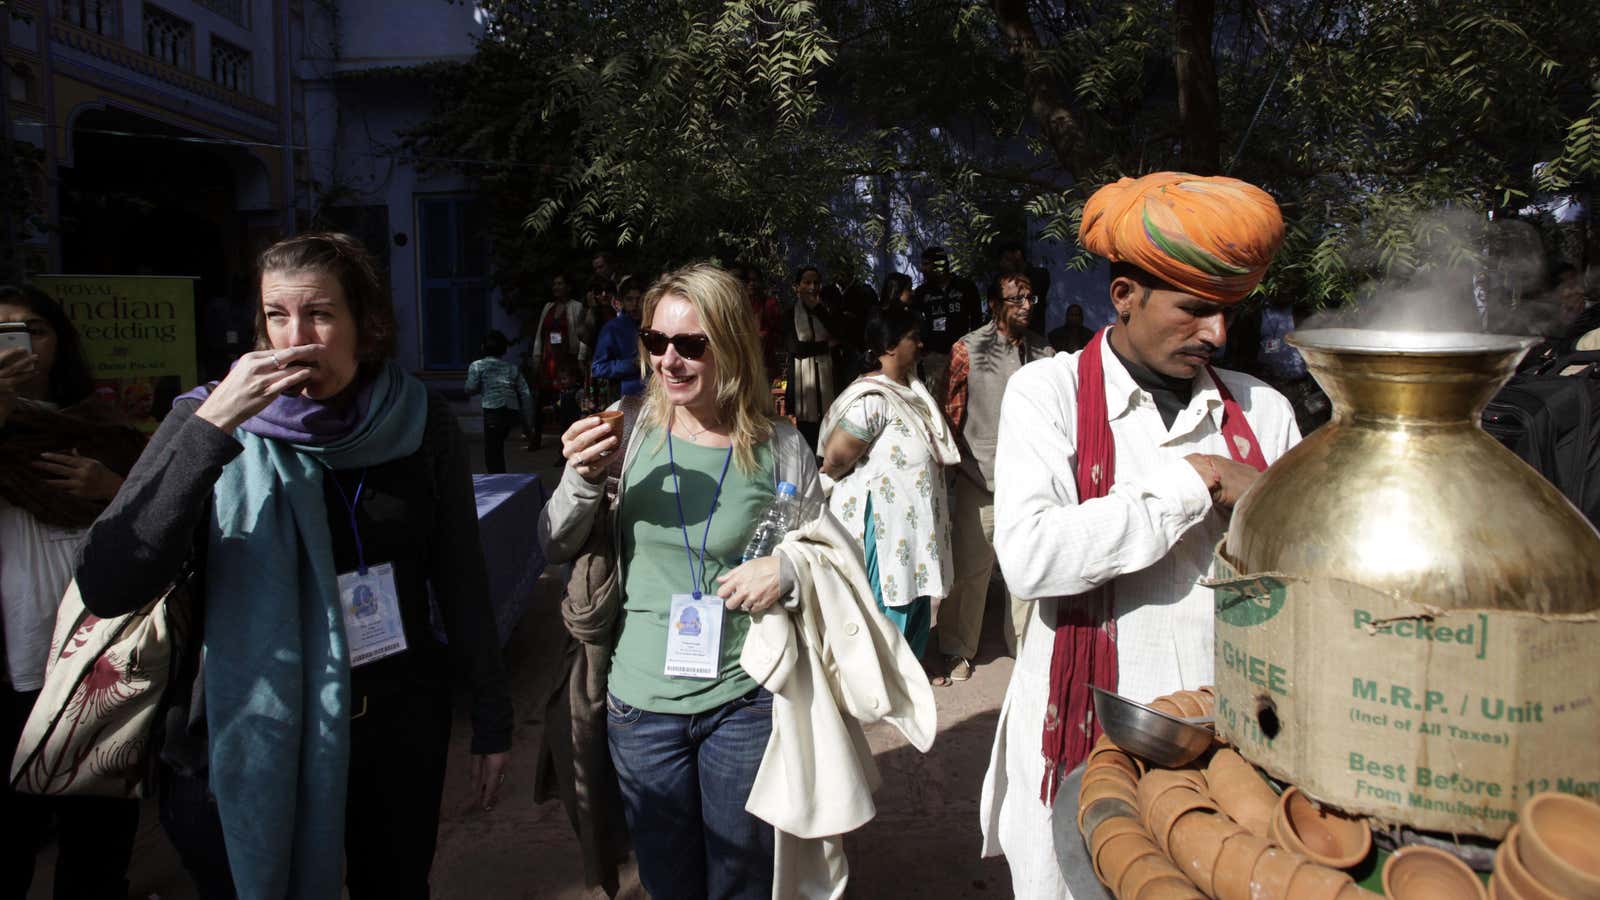 Foreign delegates sip tea in earthen mugs from a local tea vendor at the Jaipur Literature Festival.